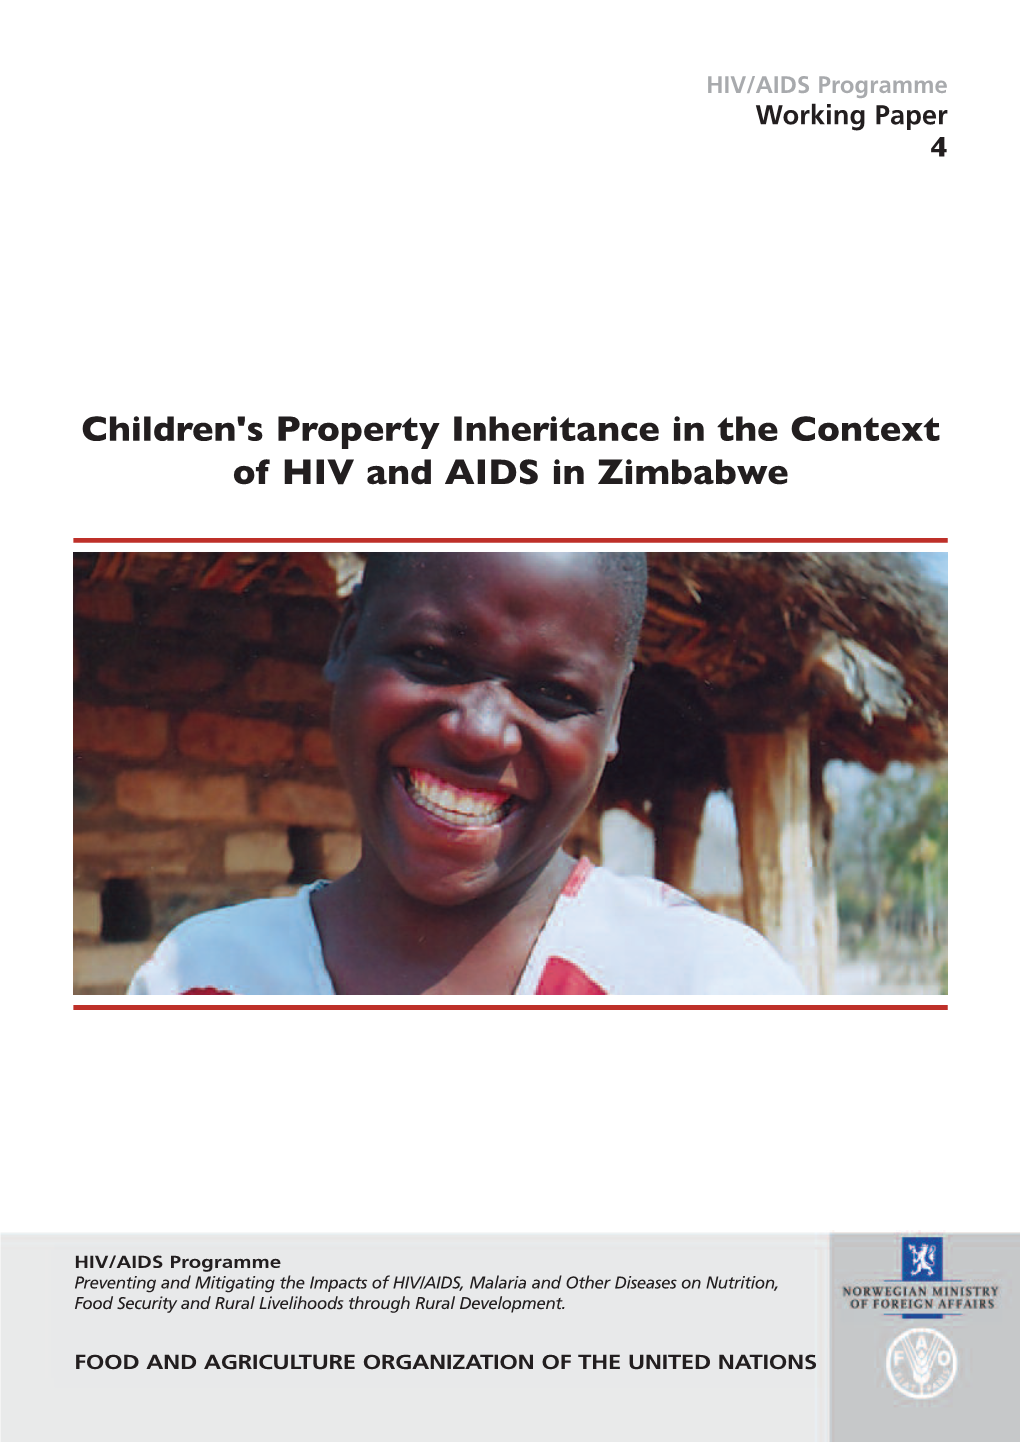 Children's Property Inheritance in the Context of HIV and AIDS in Zimbabwe